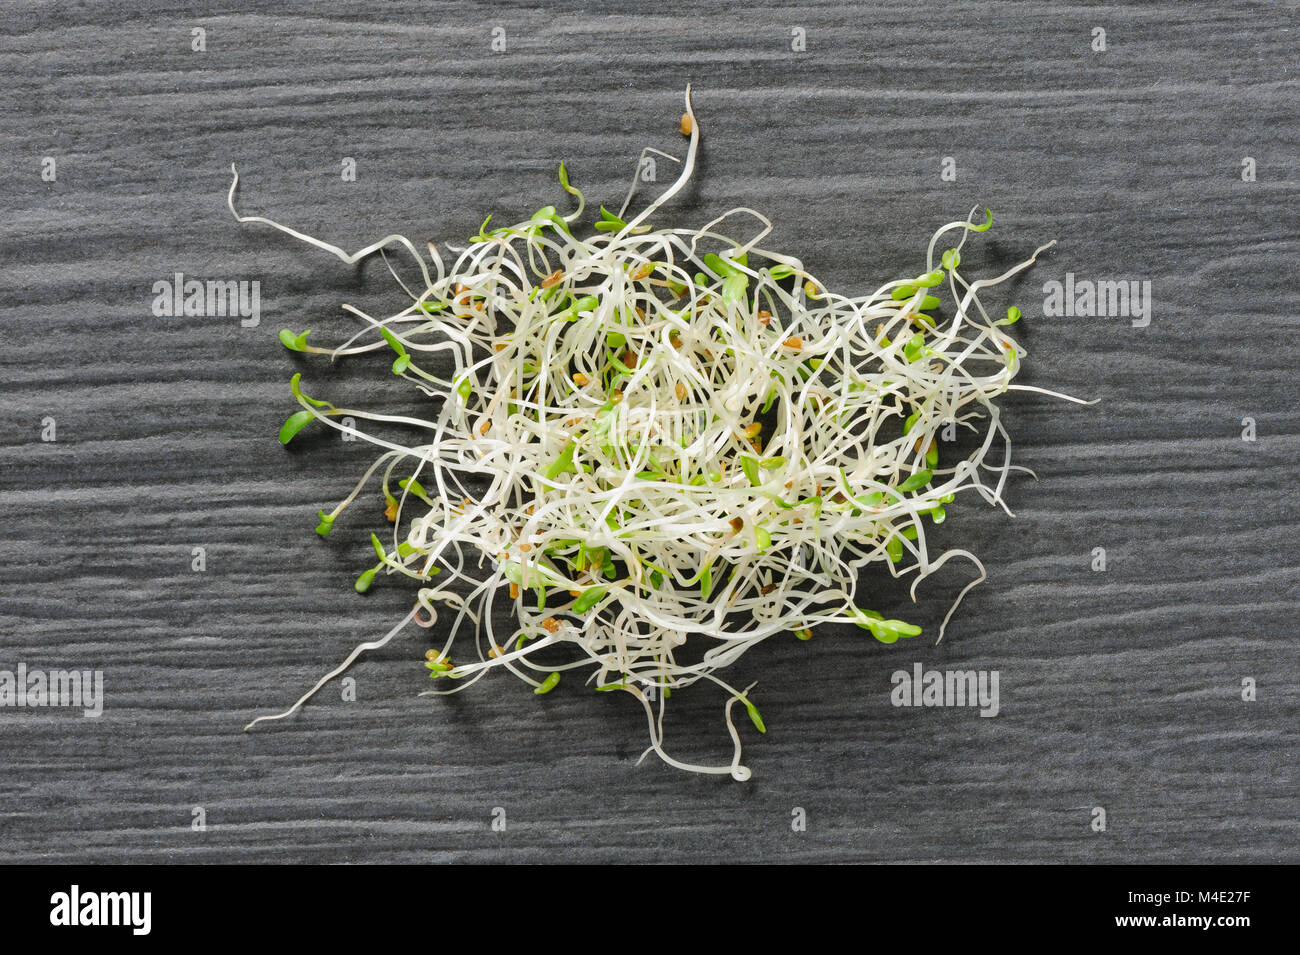 Sprouted alfalfa seeds on a dsrk stone background Stock Photo